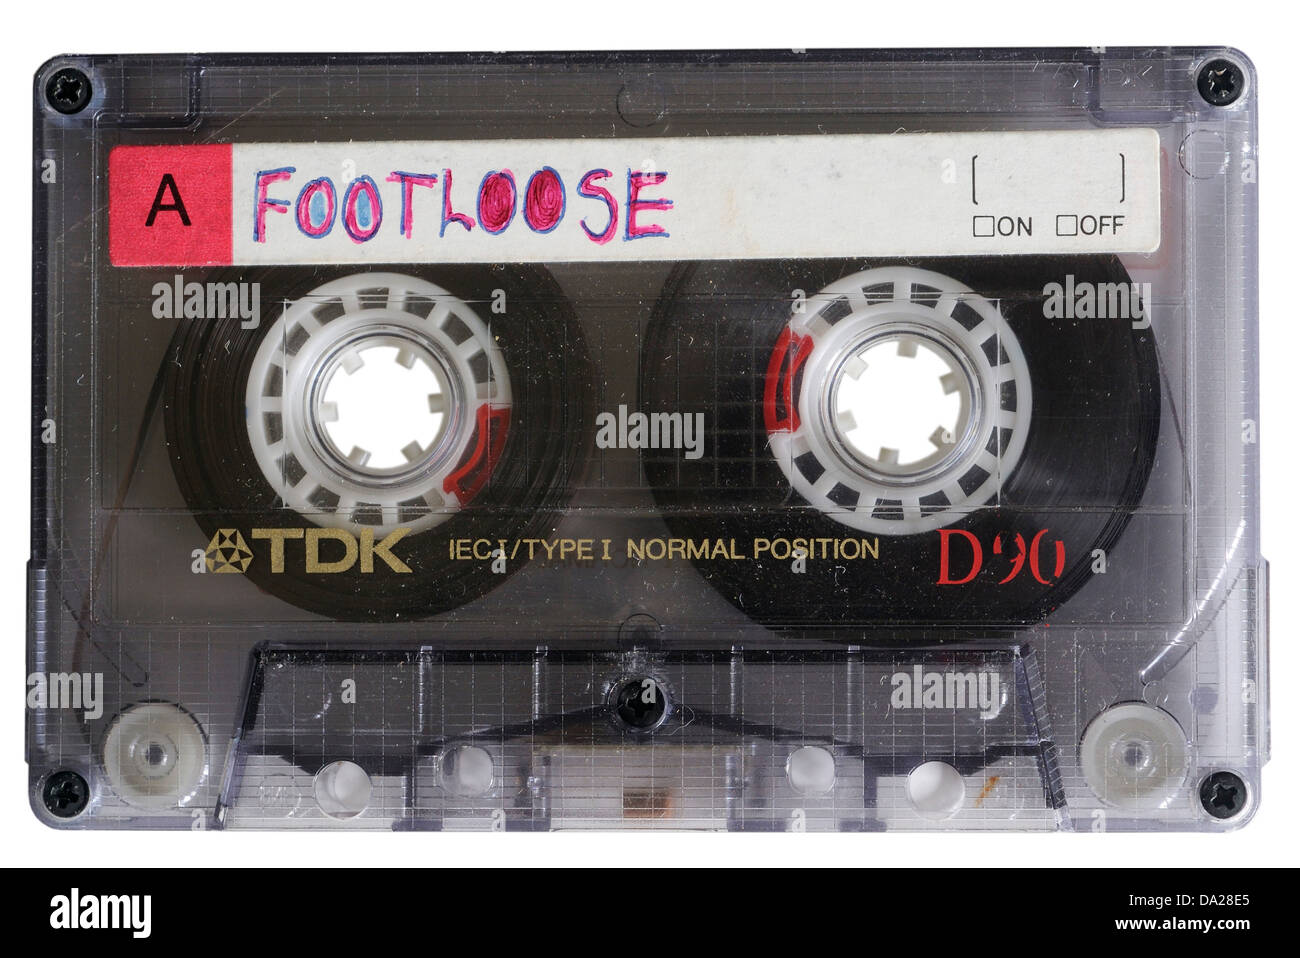 Tdk cassette hi-res stock photography and images - Alamy